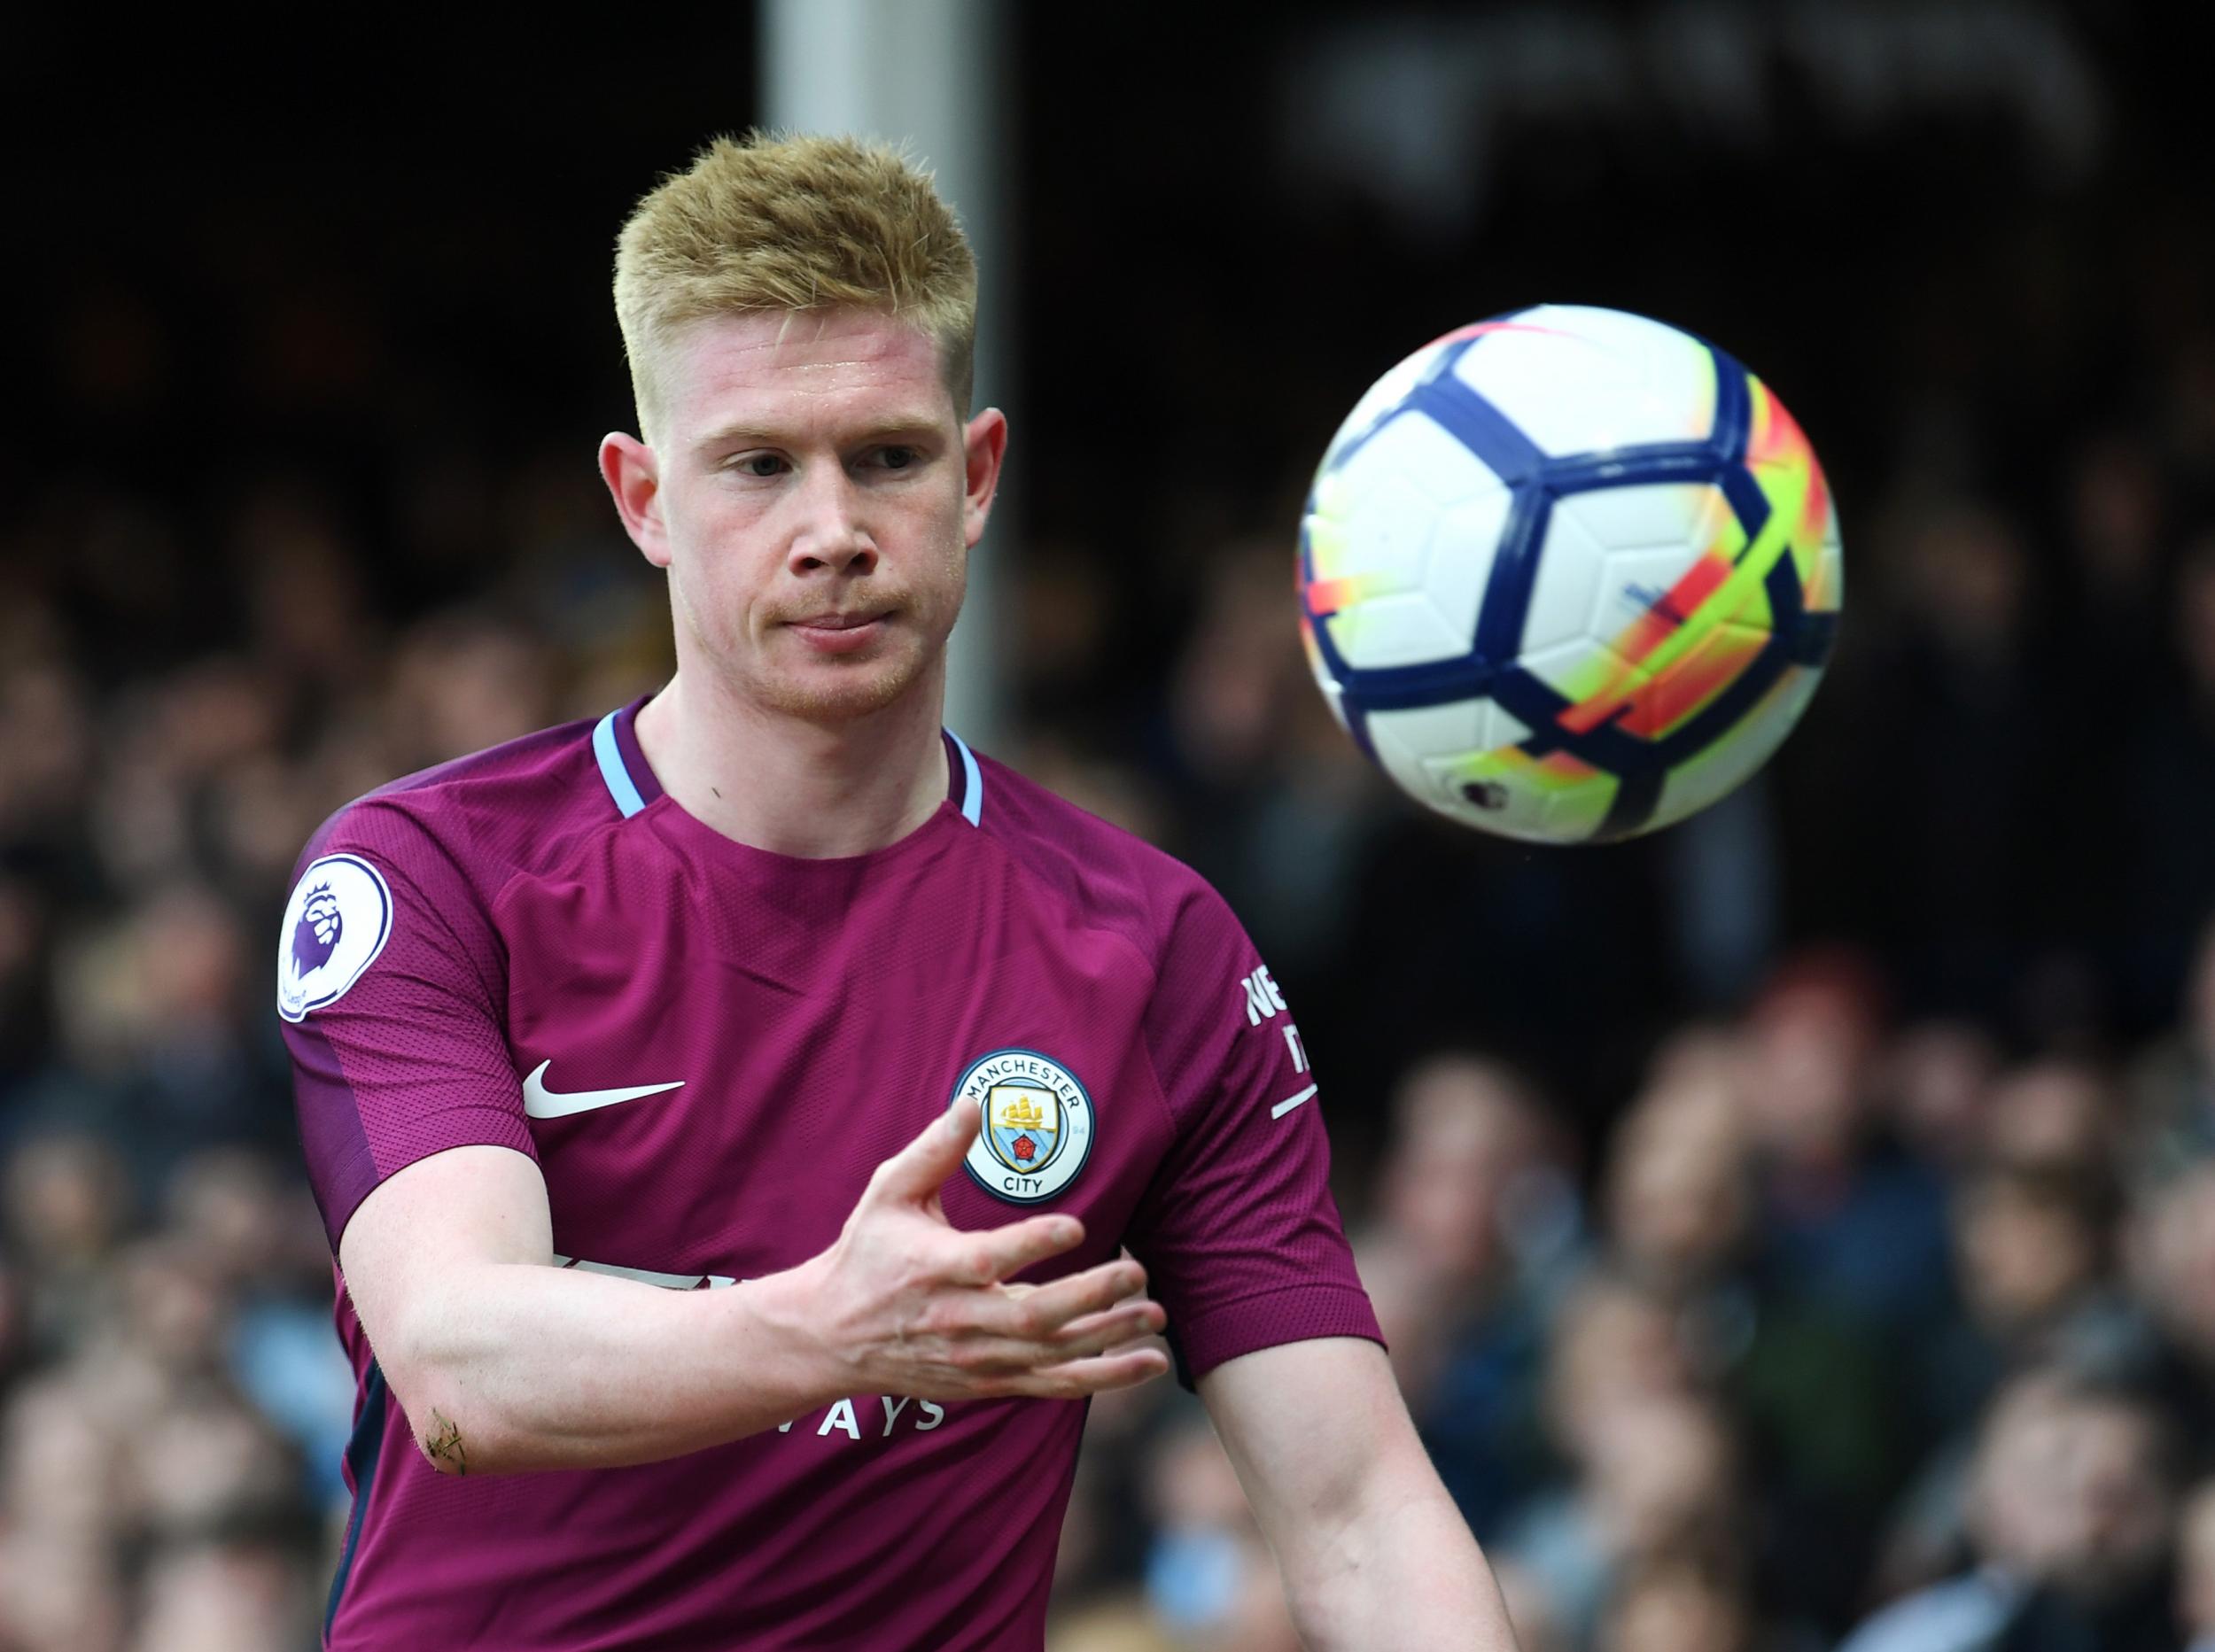 Kevin De Bruyne insists he &apos;deserves&apos; to win PFA Player of the Year over Liverpool&apos;s Mohamed Salah